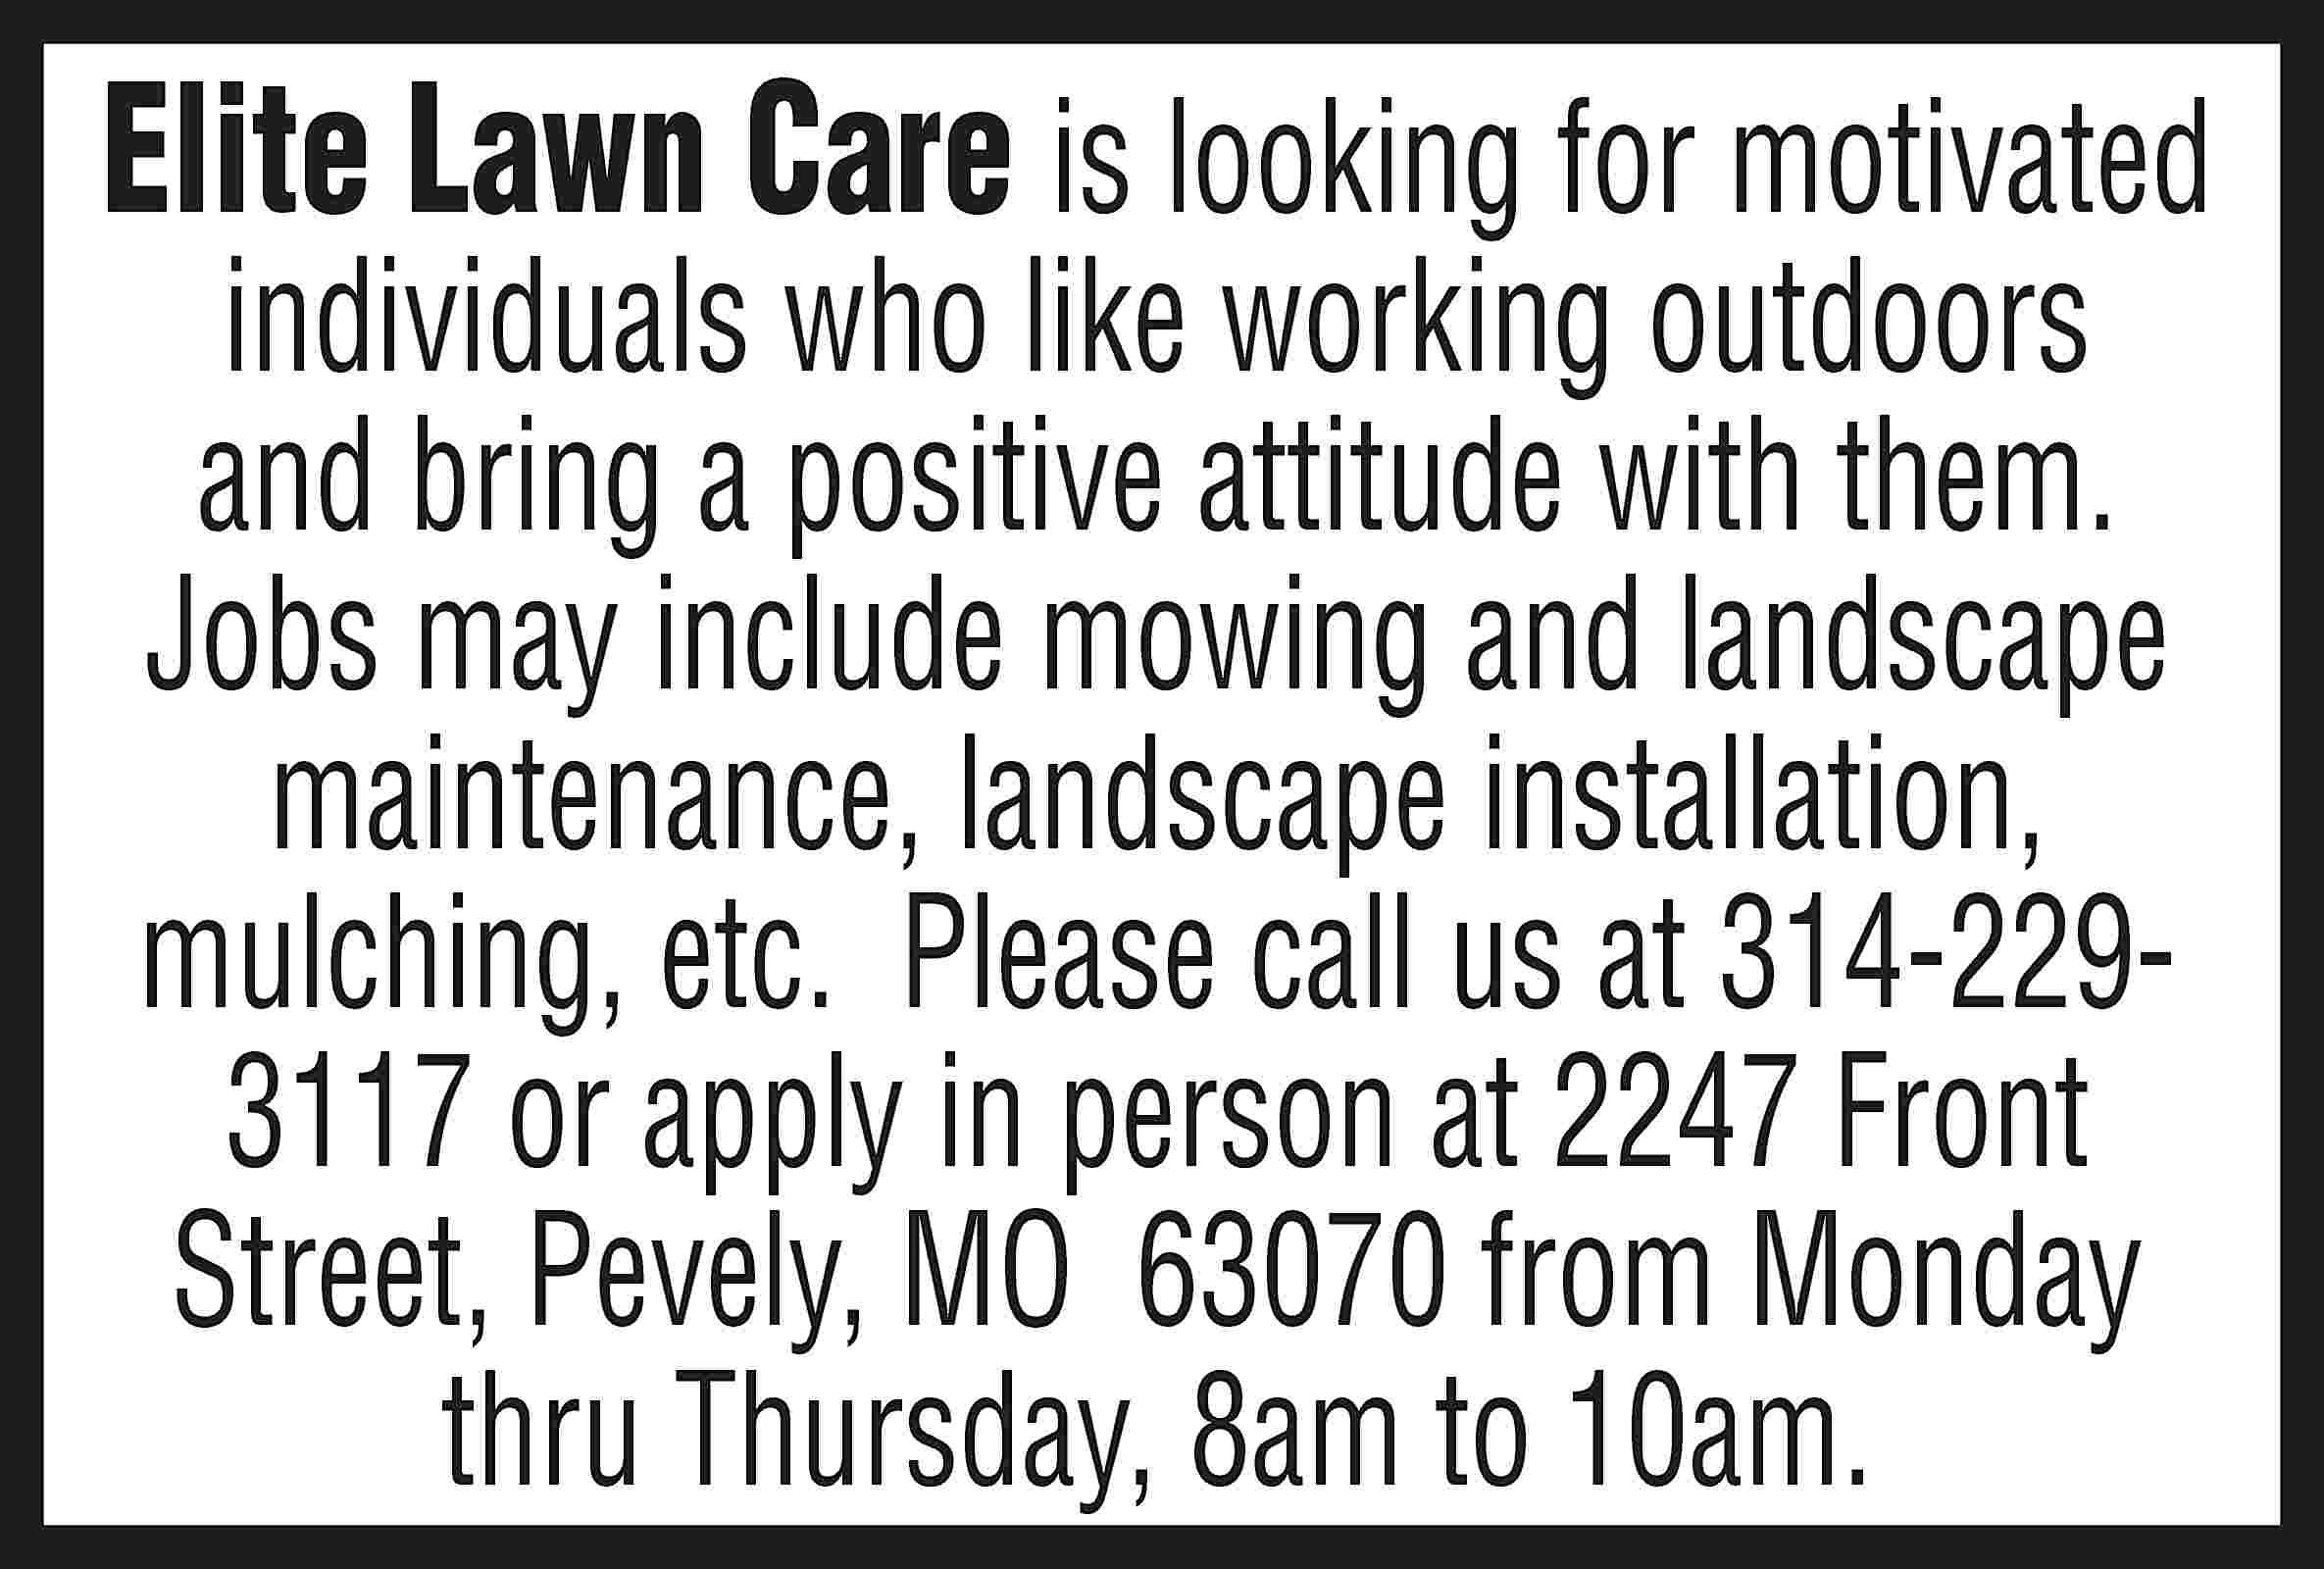 Elite Lawn Care is looking  Elite Lawn Care is looking for motivated individuals who like working outdoors and bring a positive attitude with them. Jobs may include mowing and landscape maintenance, landscape installation, mulching, etc. Please call us at 314-2293117 or apply in person at 2247 Front Street, Pevely, MO 63070 from Monday thru Thursday, 8am to 10am.